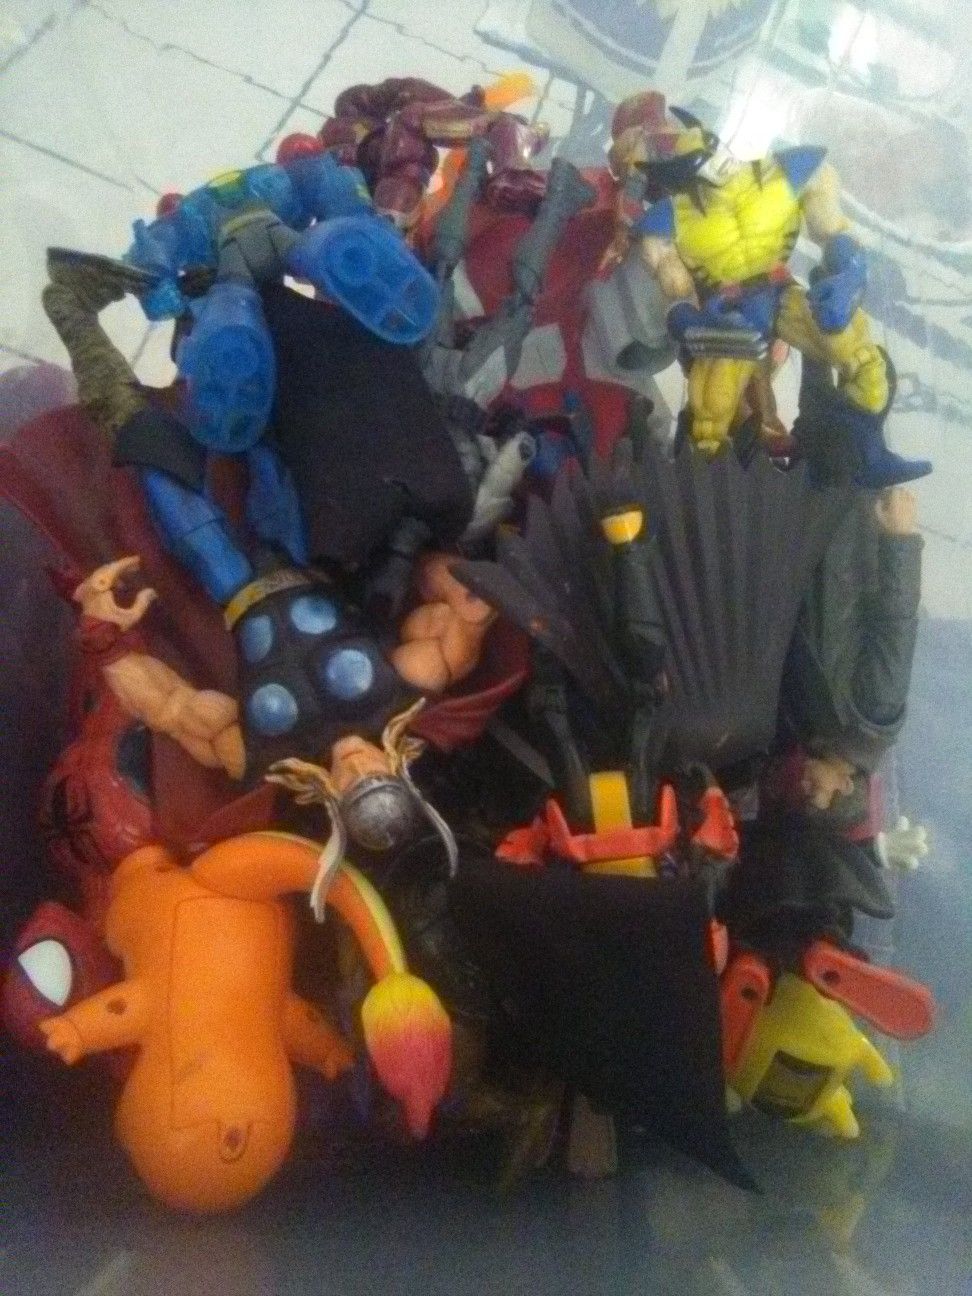 lots of toy figures